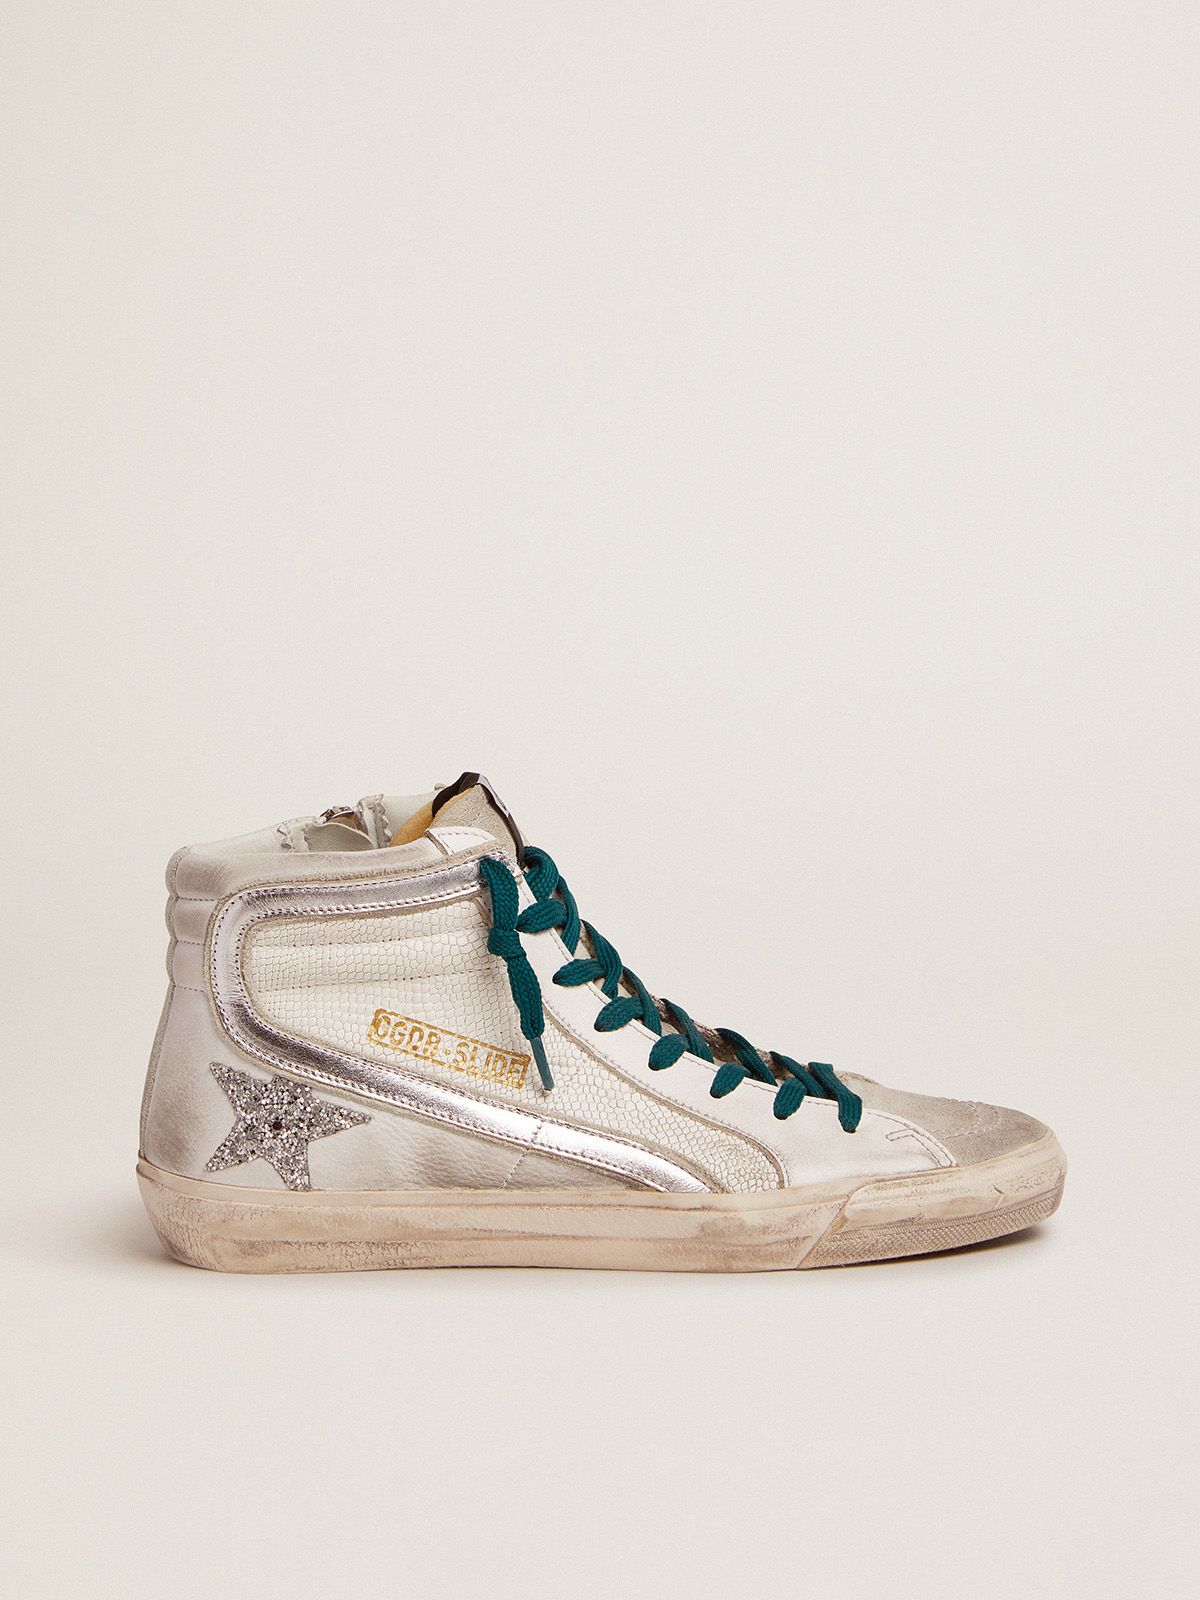 Slide sneakers with snake-print leather upper and silver glitter star